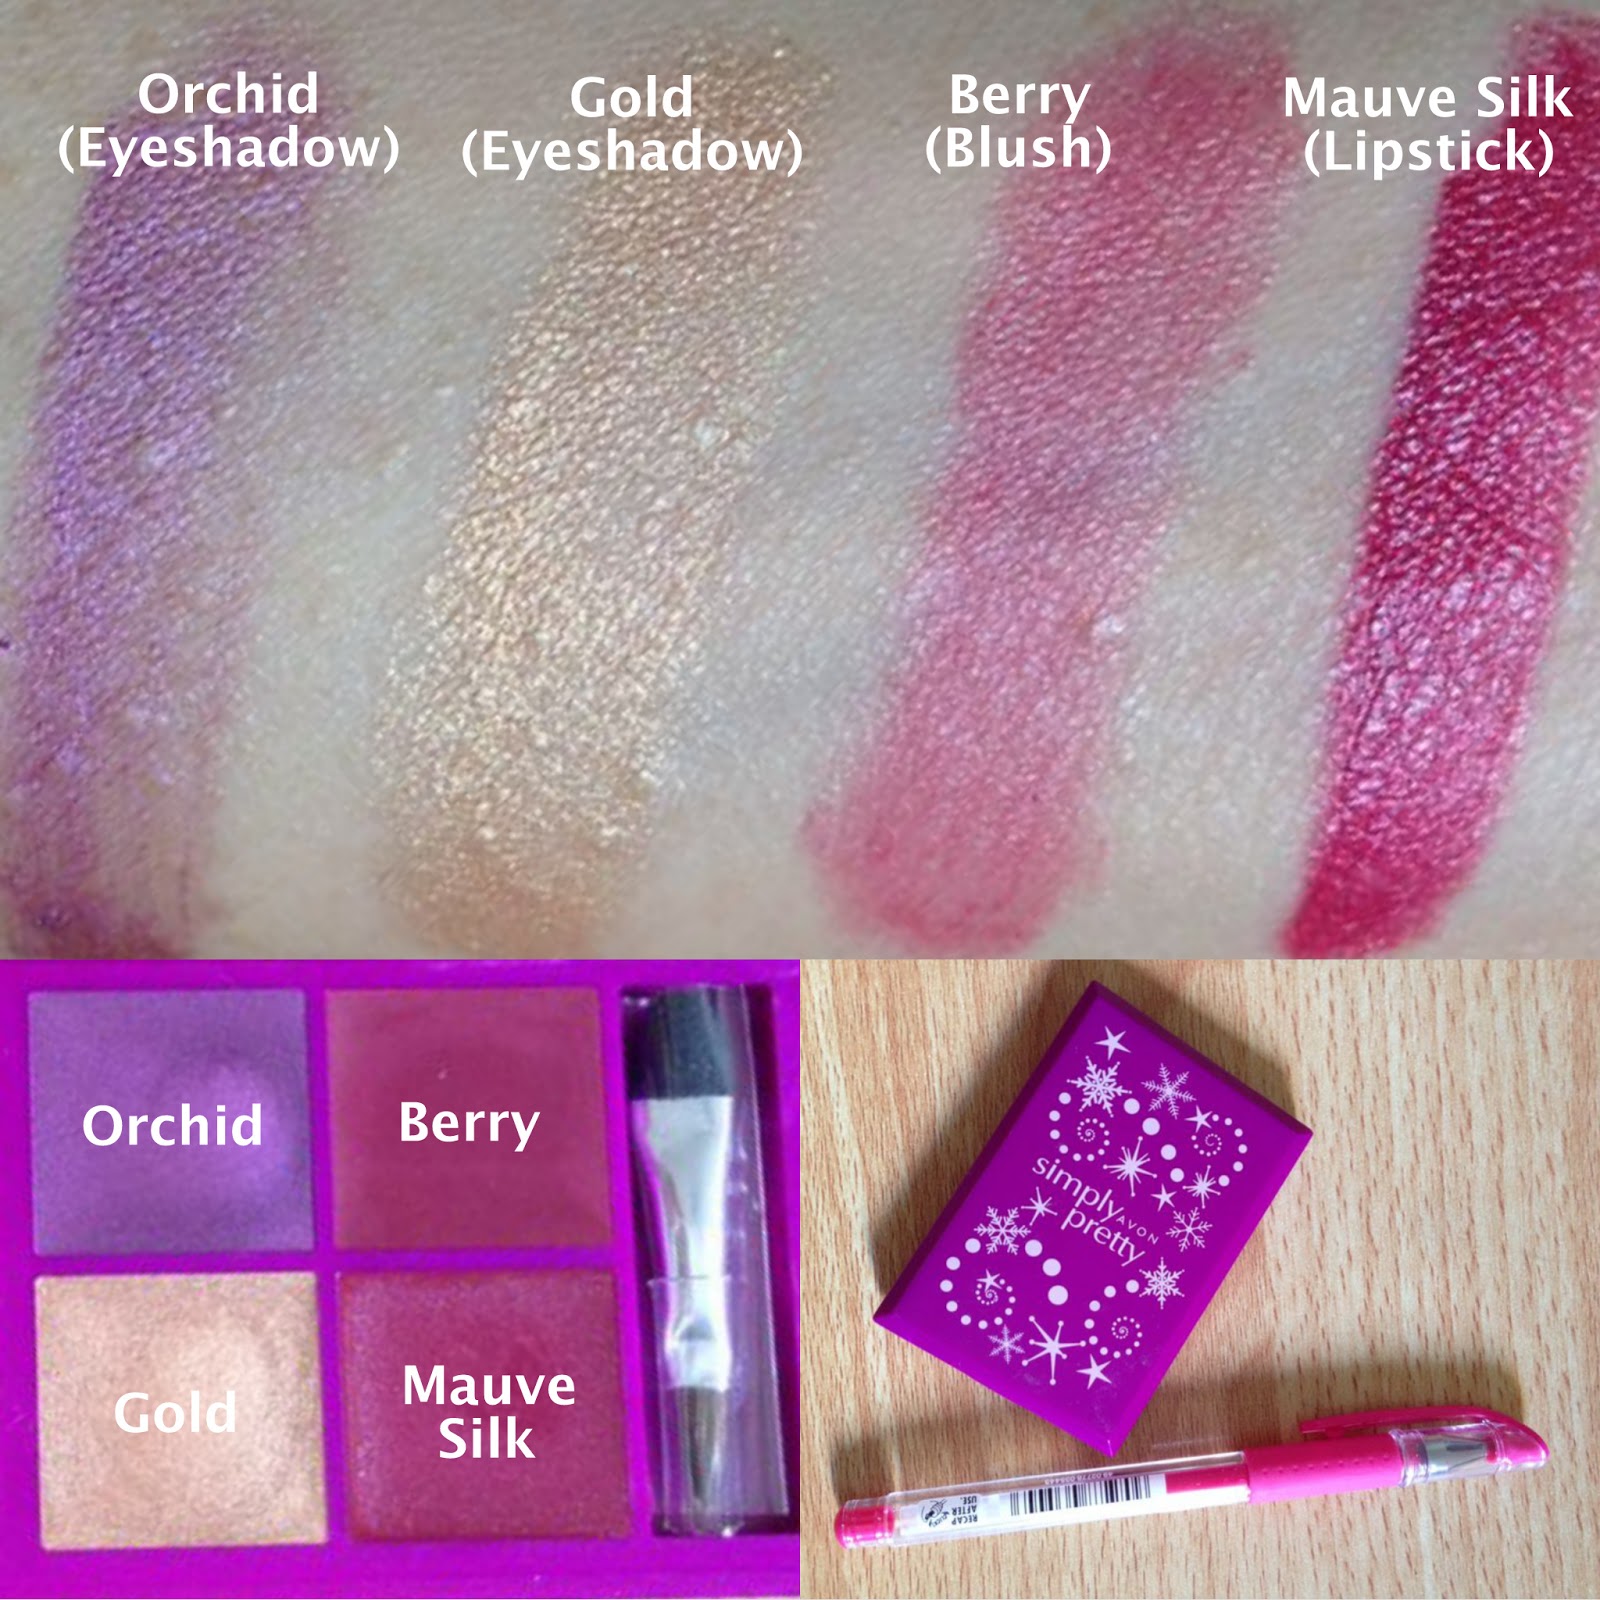 Avon Simply Pretty Holiday Makeup Palette in Dazzling Orchid Product Review